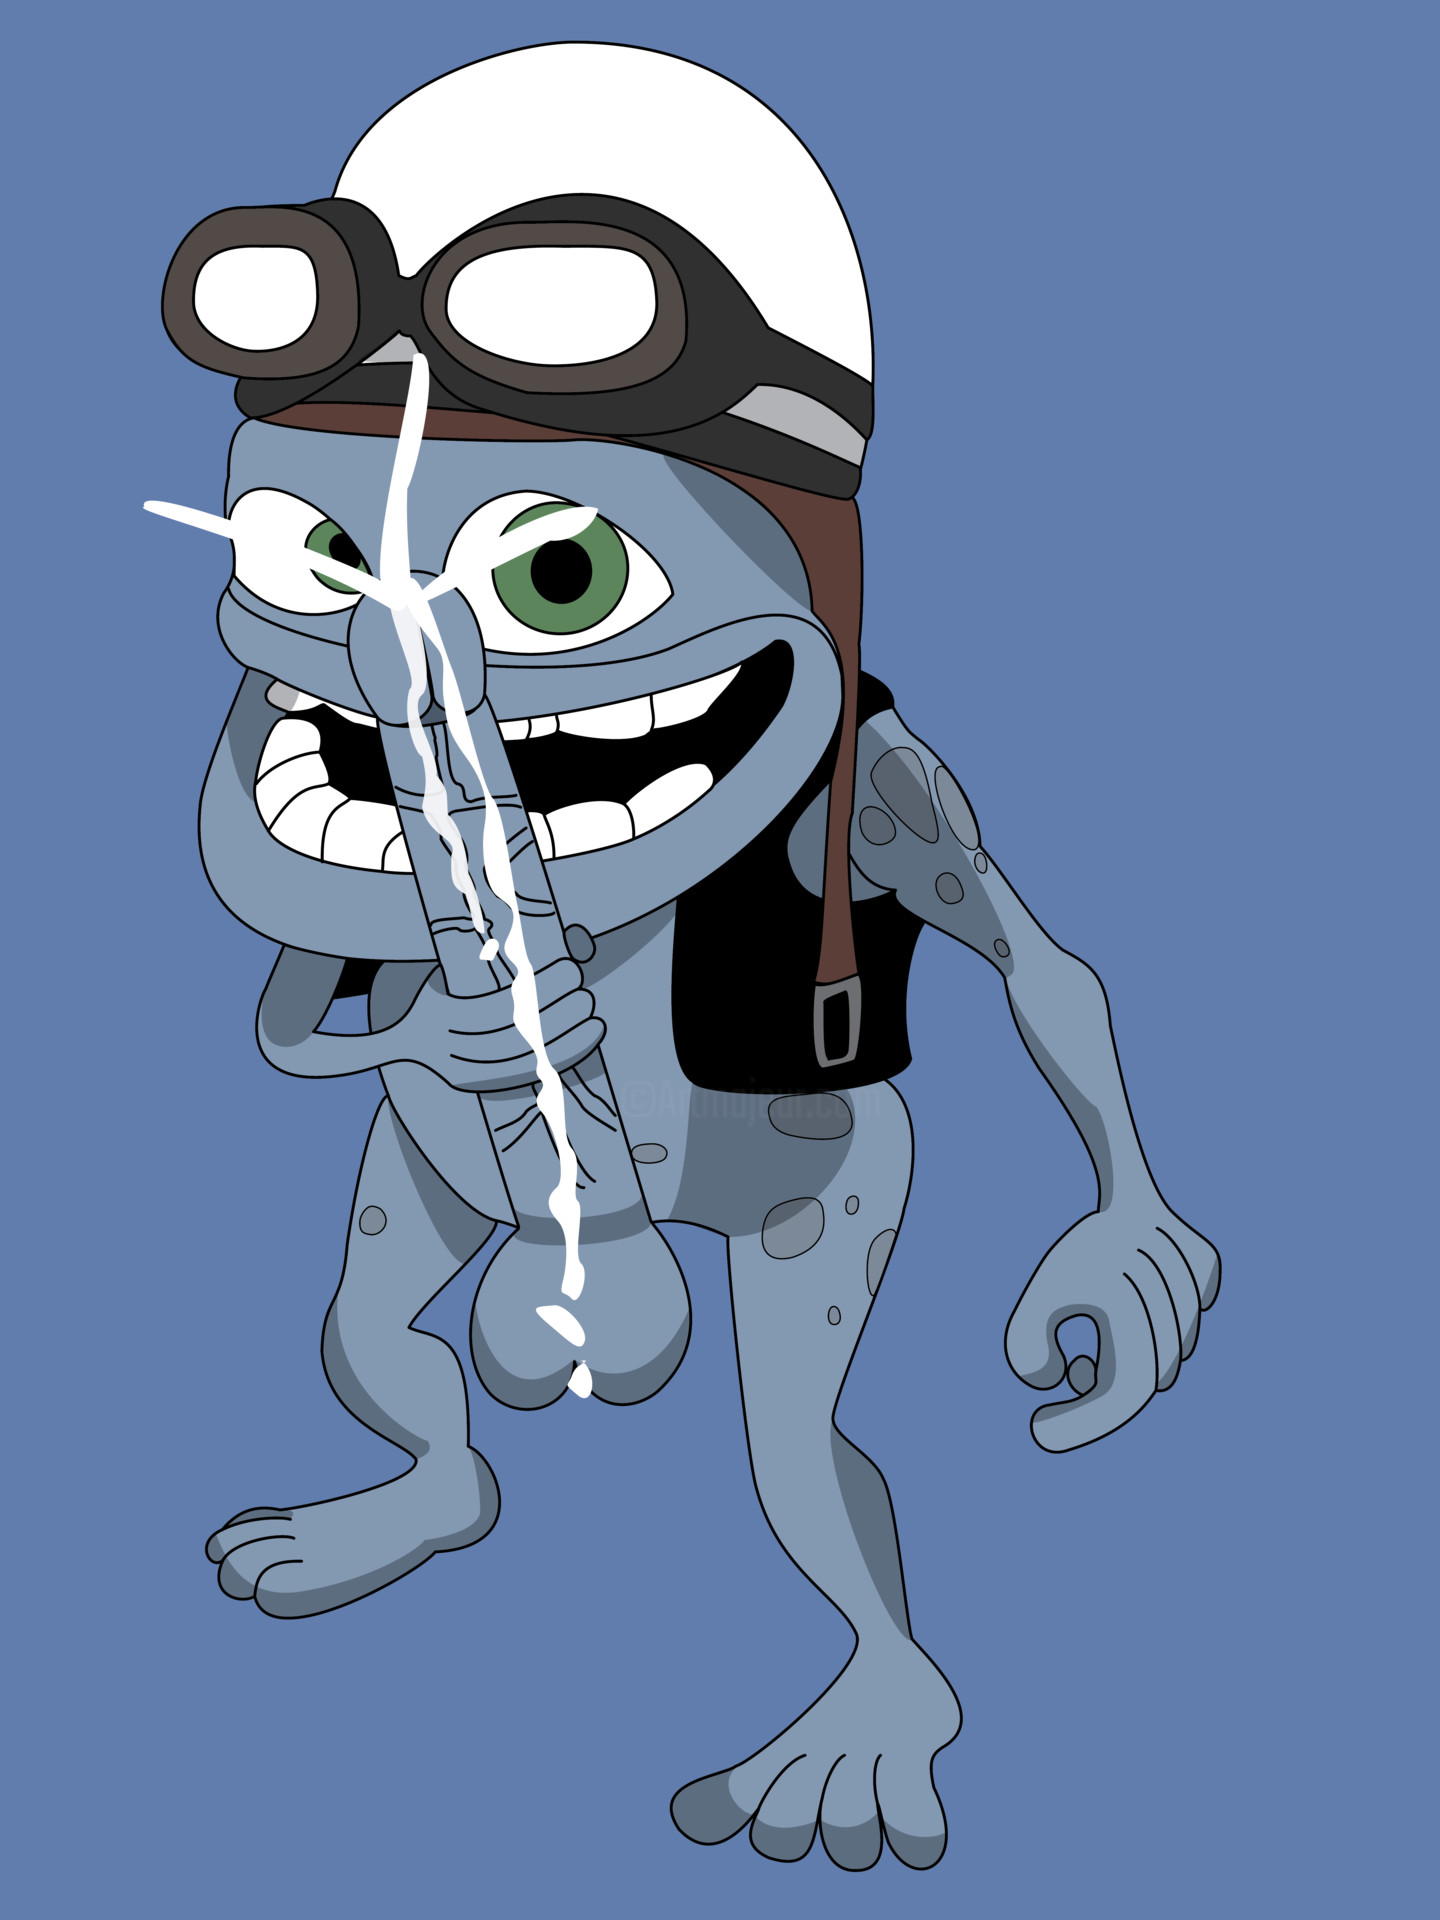 Crazy Frog Fapping, Digital Arts by Happy The Red